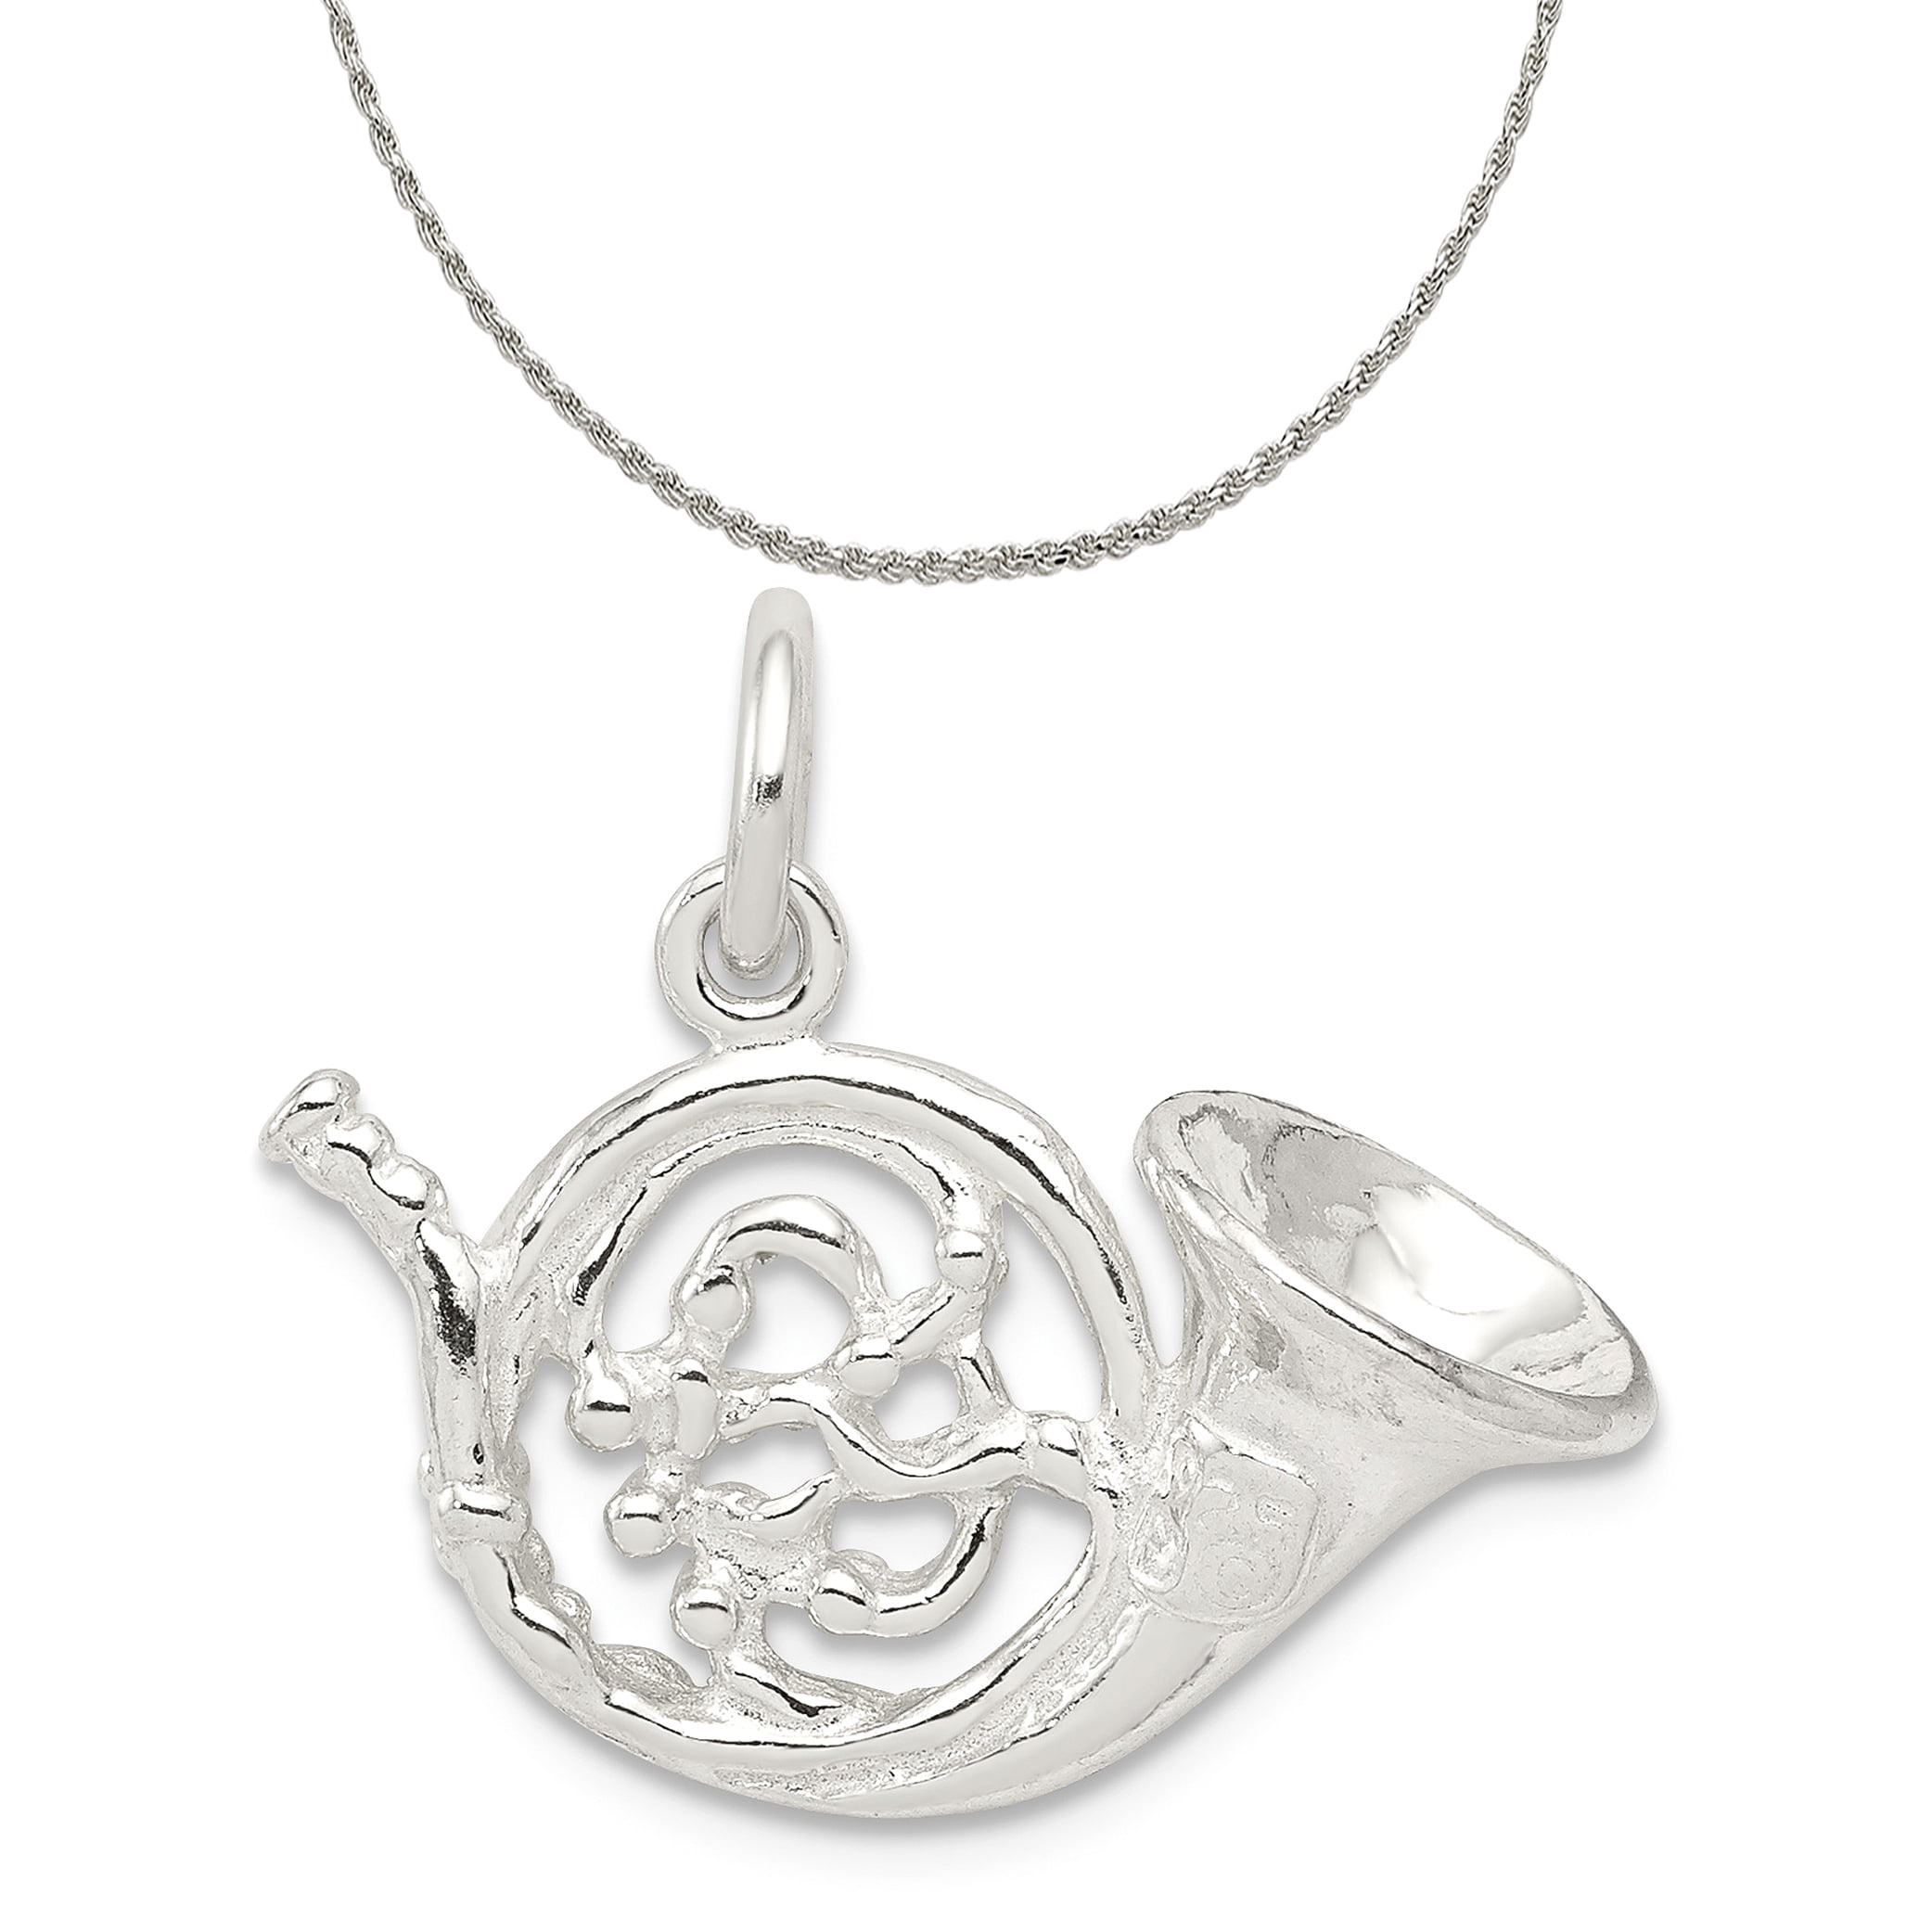 Sterling Silver 3-D Antiqued French Horn w/Lobster Clasp Charm Pendant